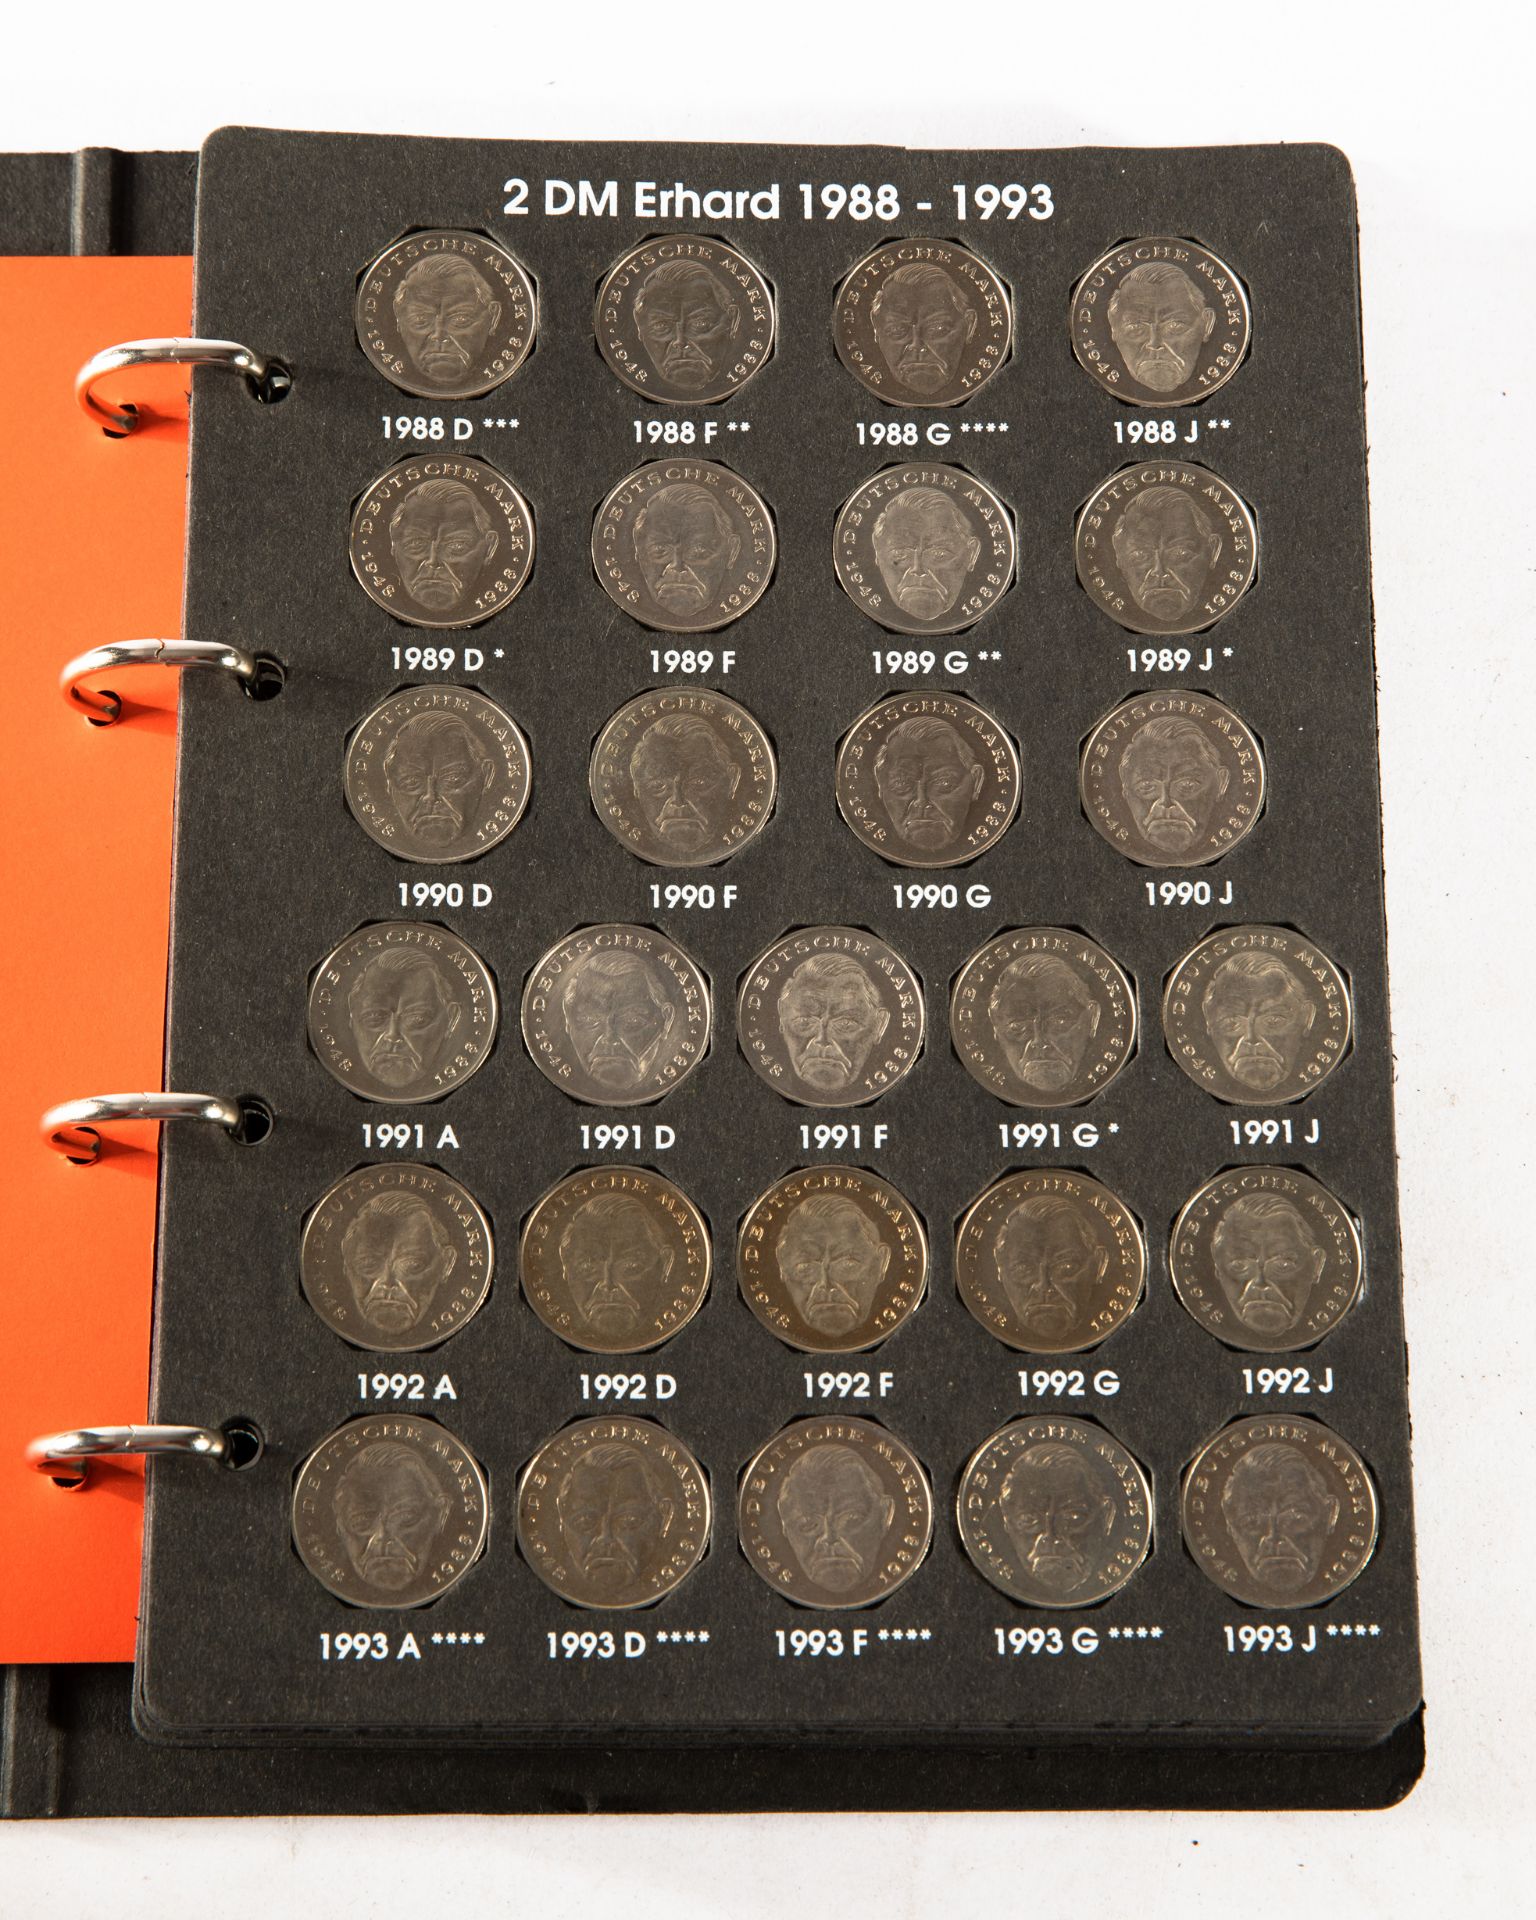 Germany - 2x full coin albums 2 DM Coins 1970-1996 - Image 24 of 33